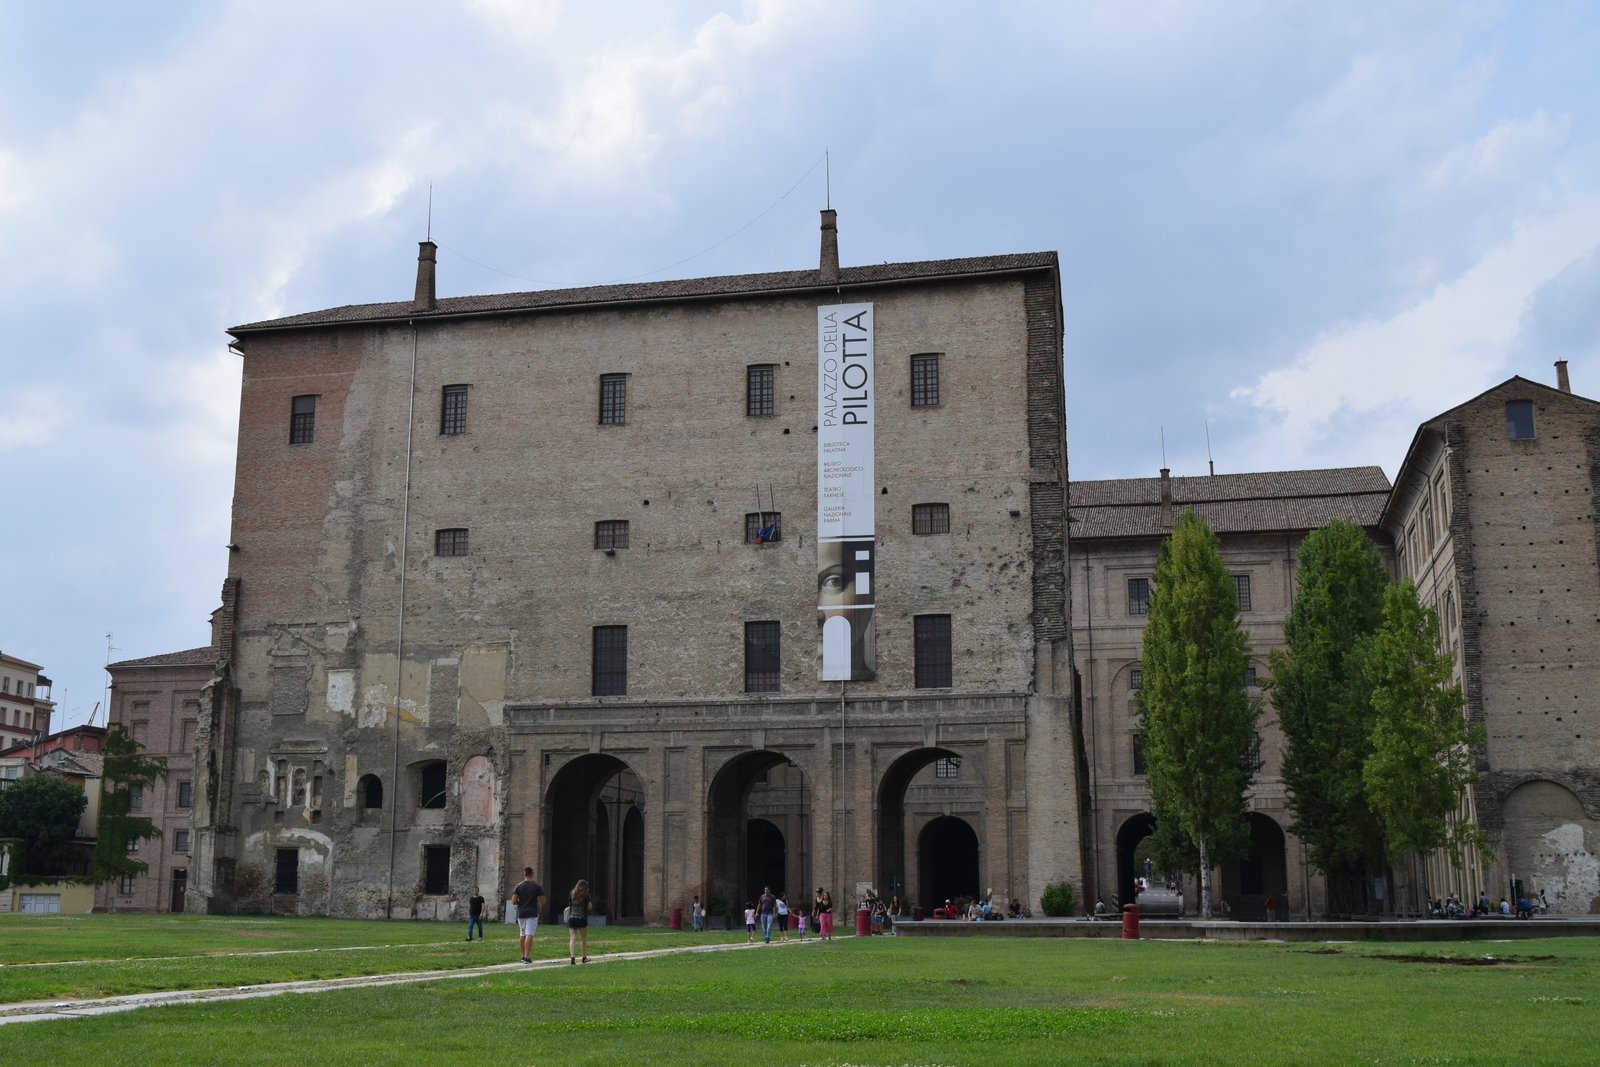 If you are in Parma, Italy this Palazzo is a great place to visit. The theater is made of wood and awesome. ouritalianjourney.com https://ouritalianjourney.com/palazzo-della-pilotta-parma